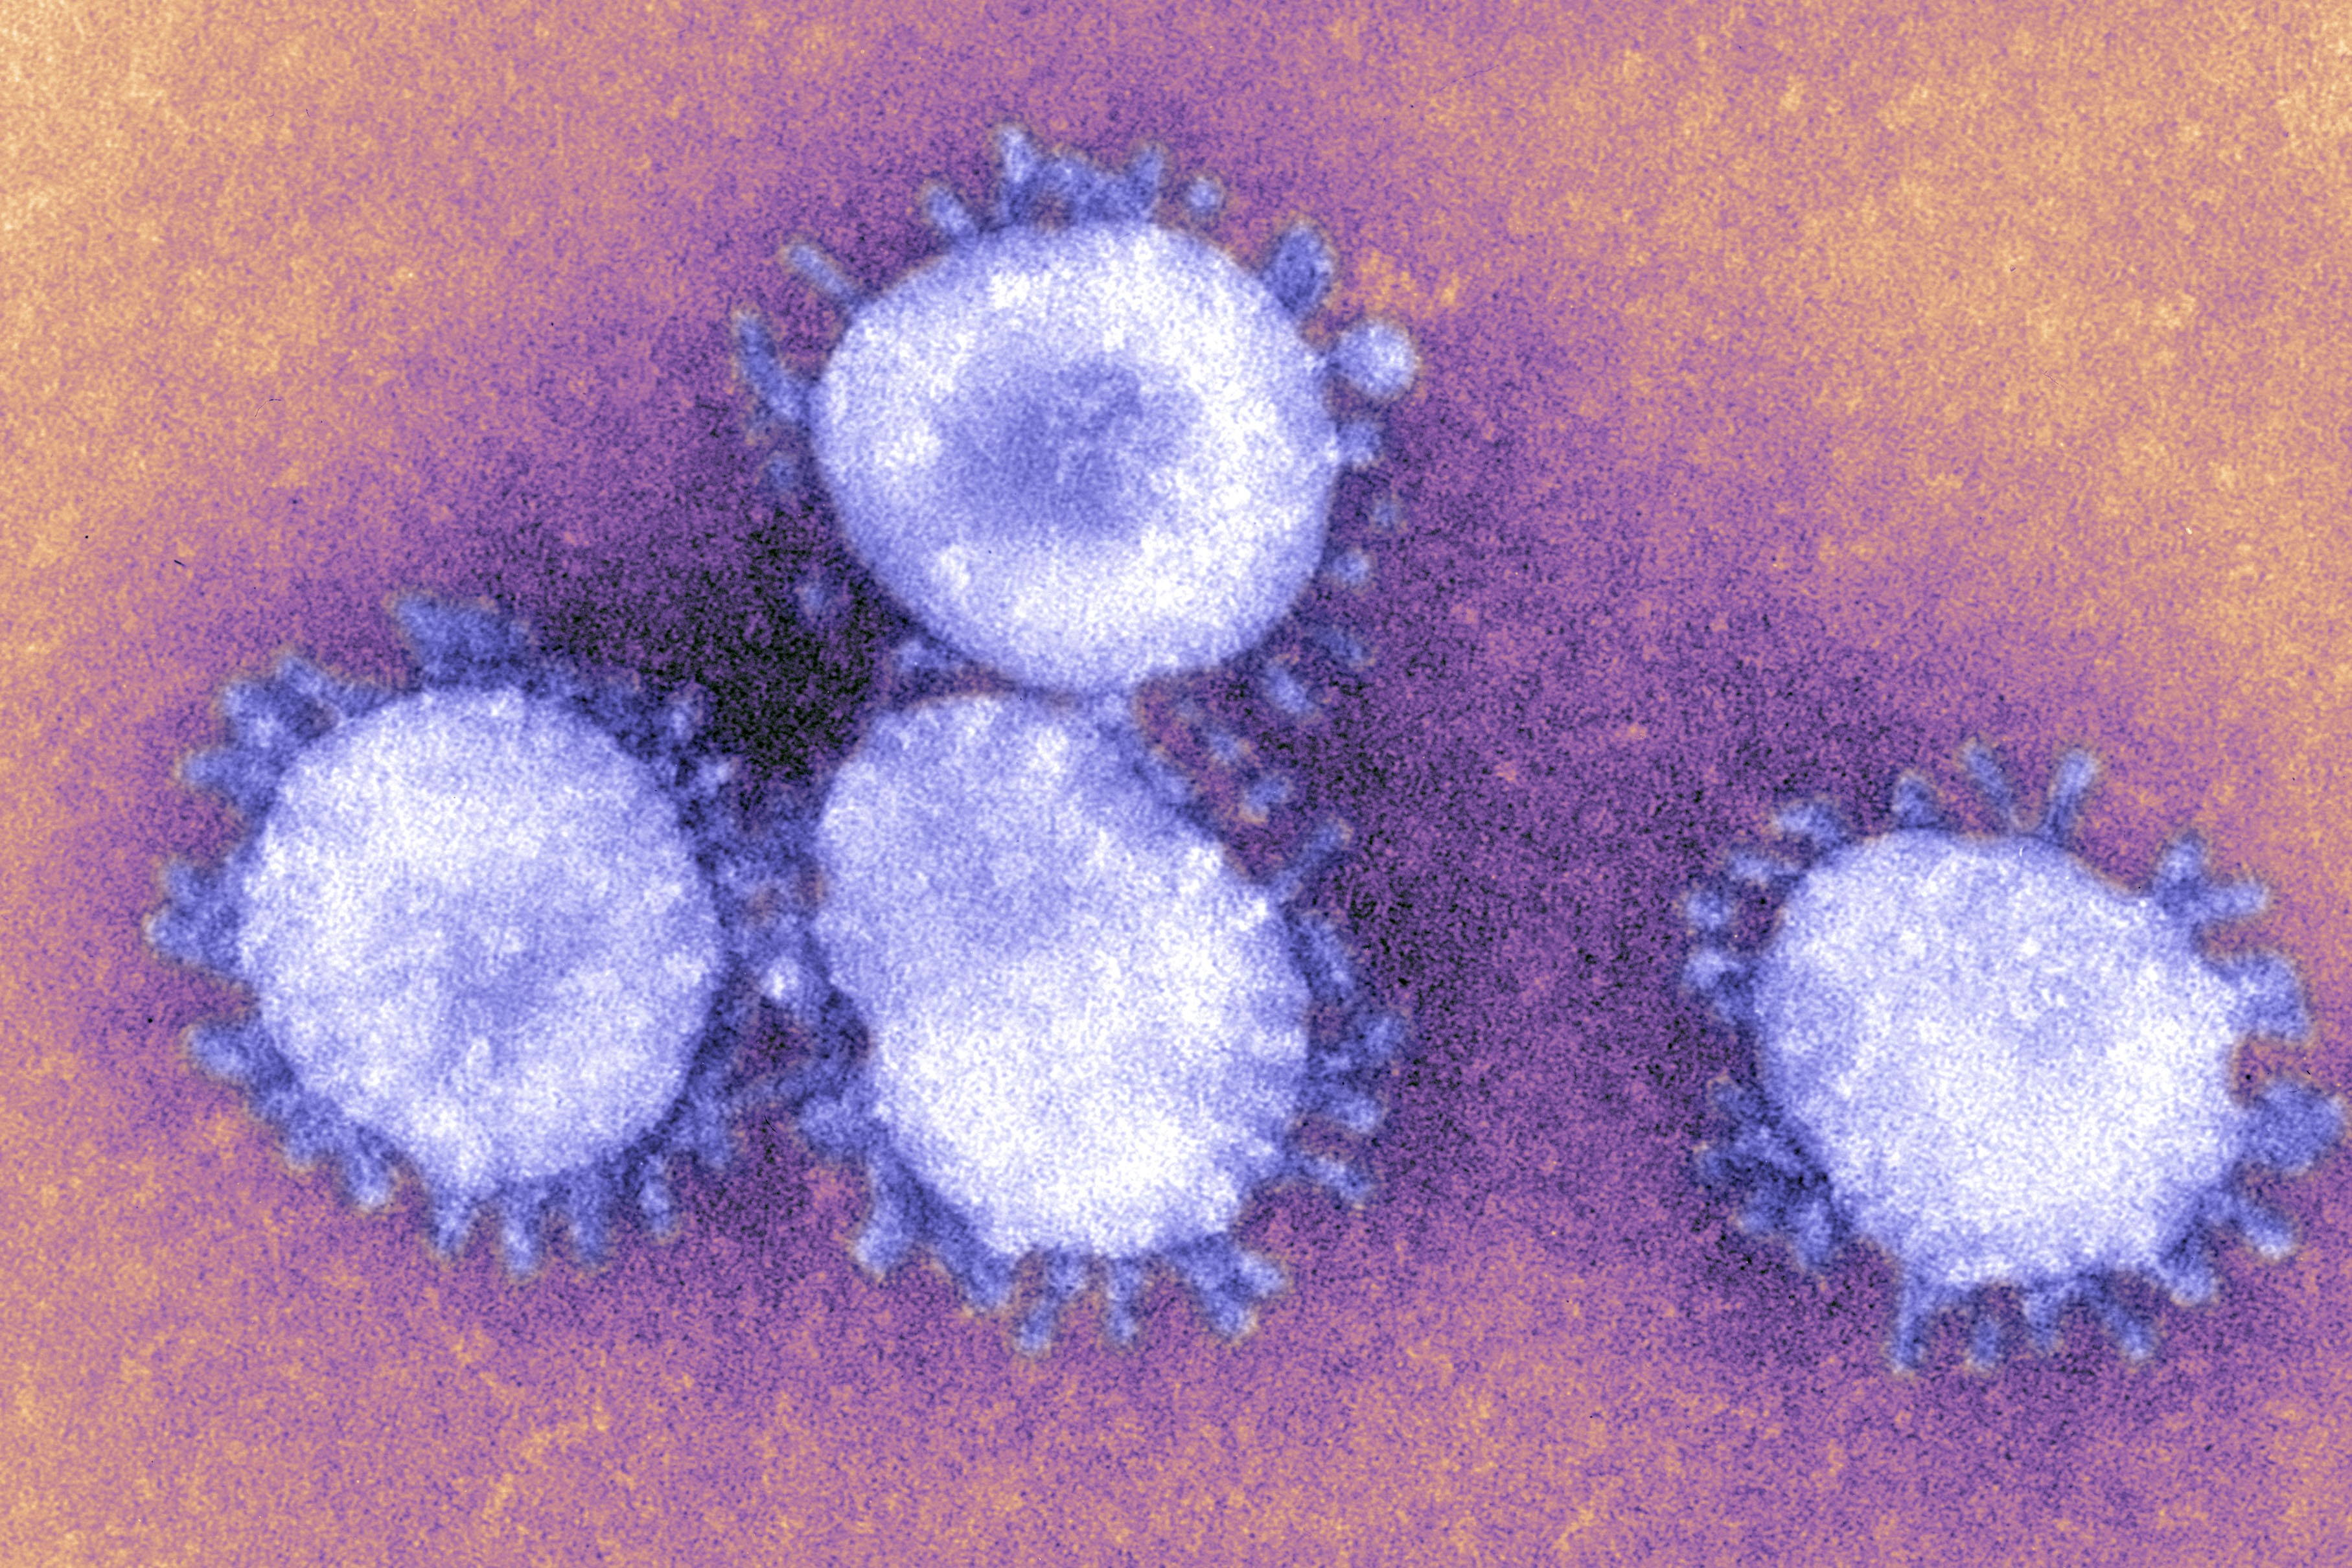 The Coronaviruses Owe Their Name To The The Crown Like Projections, Visible Under Microscope, That Encircle The Capsid. The Coronaviruses Are Responsible For Respiratory Ailments And Gastro Enteritis. The Virus Responsible For Sars Belongs To This Family. (Foto: Universal Images Group via Getty)